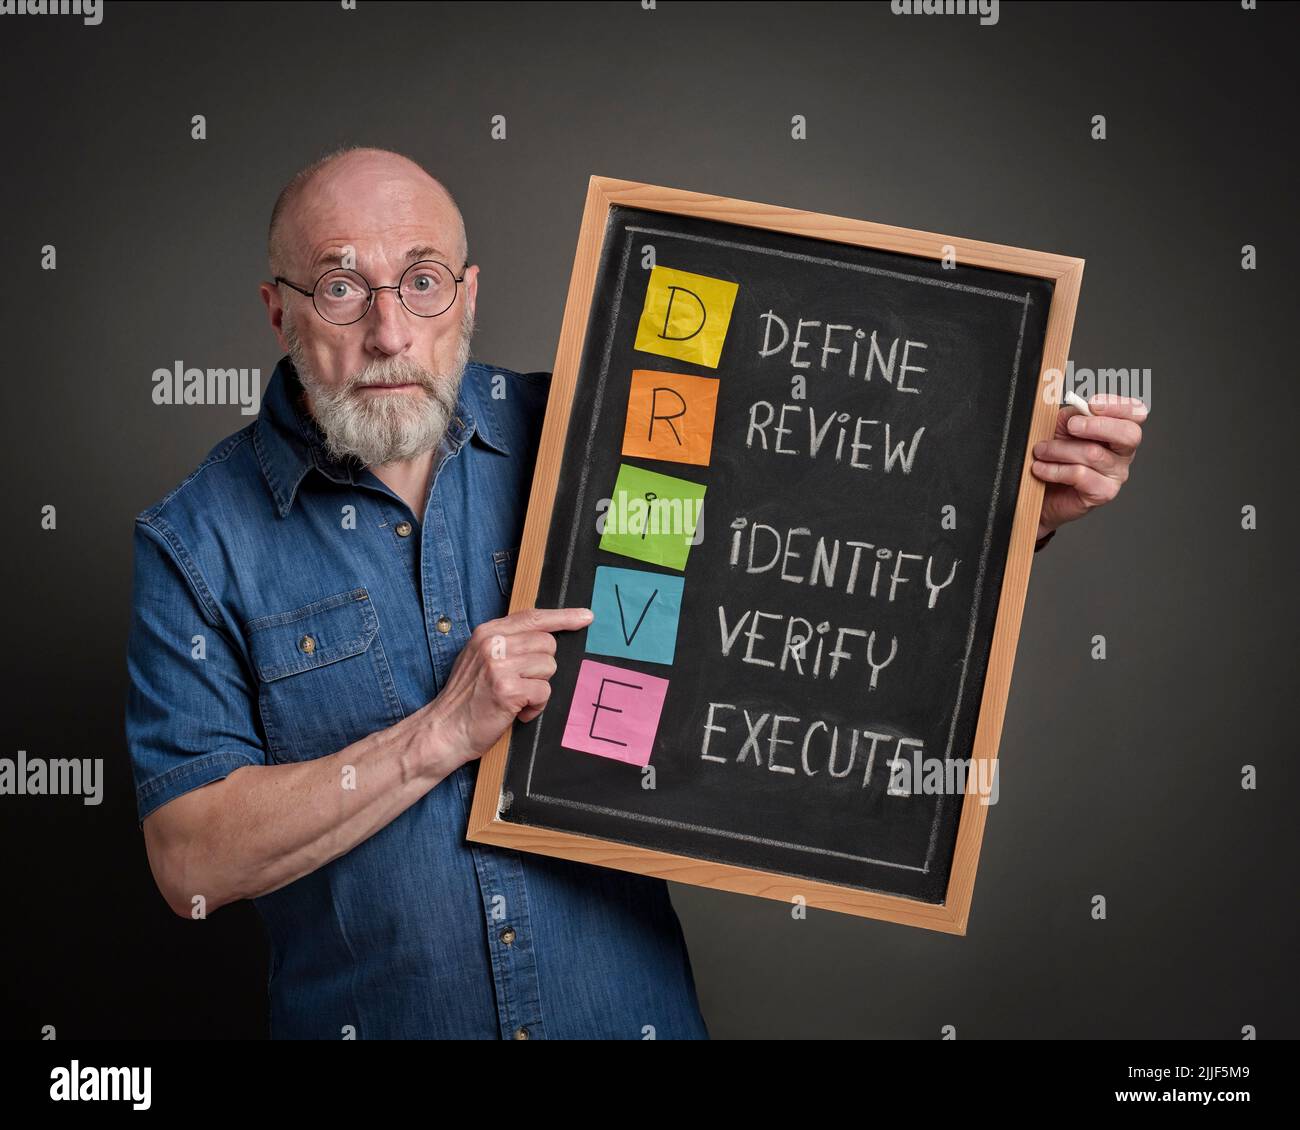 DRIVE (Define, Review, Identify, Verify, Execute) - acronym used in quality management explained by a senior presenter or teacher on a blackboard Stock Photo